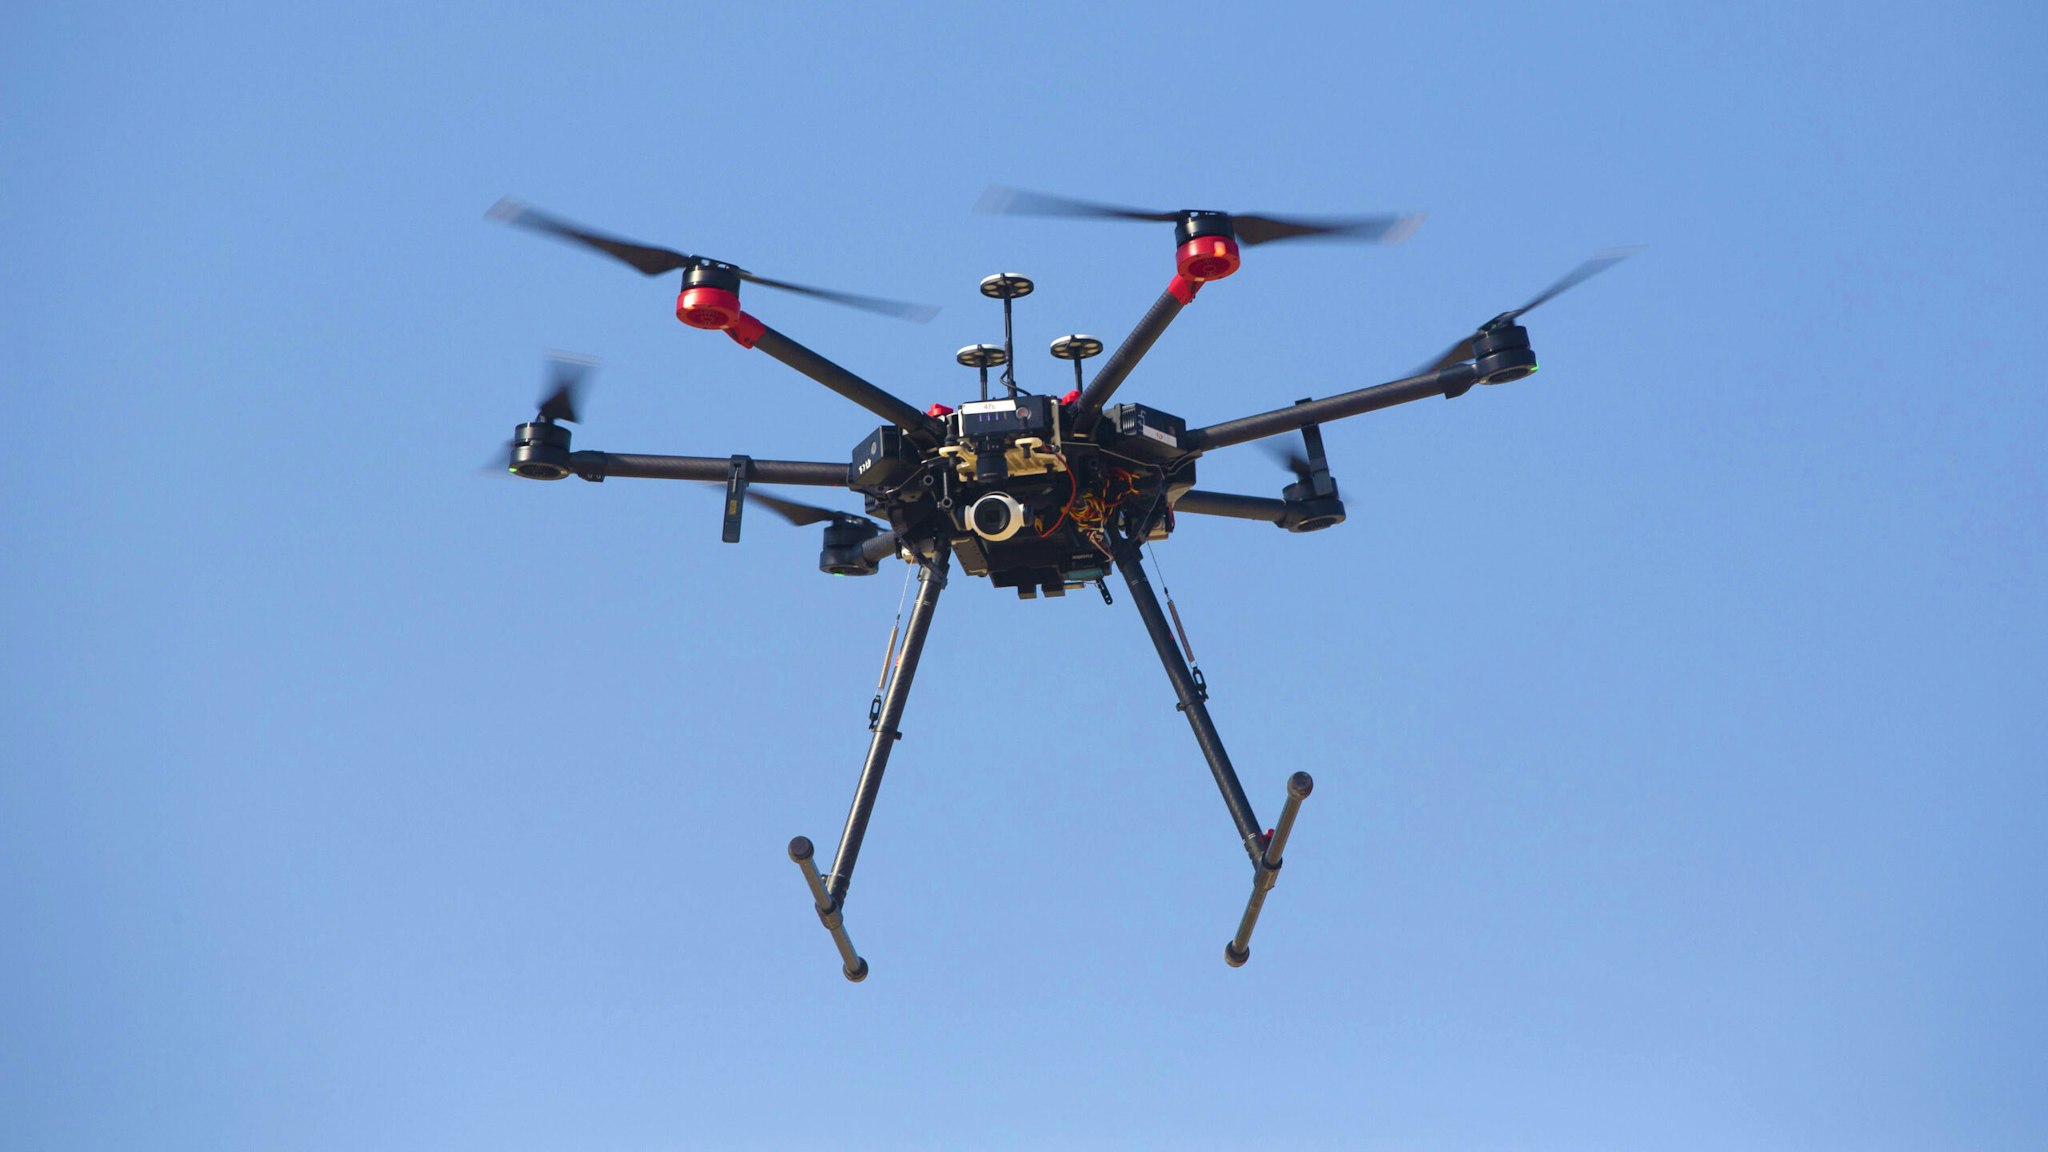 An Israeli DJI Matrice 600 Pro military drone used for bringing down incendiary balloons and kites flown from Gaza flies during a media demonstration by the Israeli Defense Force (IDF) at an army base near Rishon LeZion, Israel, on Tuesday, Nov. 26, 2019. Drones are a new and significant threat, Israeli Prime Minister Benjamin Netanyahu told the Cabinet Sunday, adding that the army intercepted one launched from the Gaza Strip over the weekend.